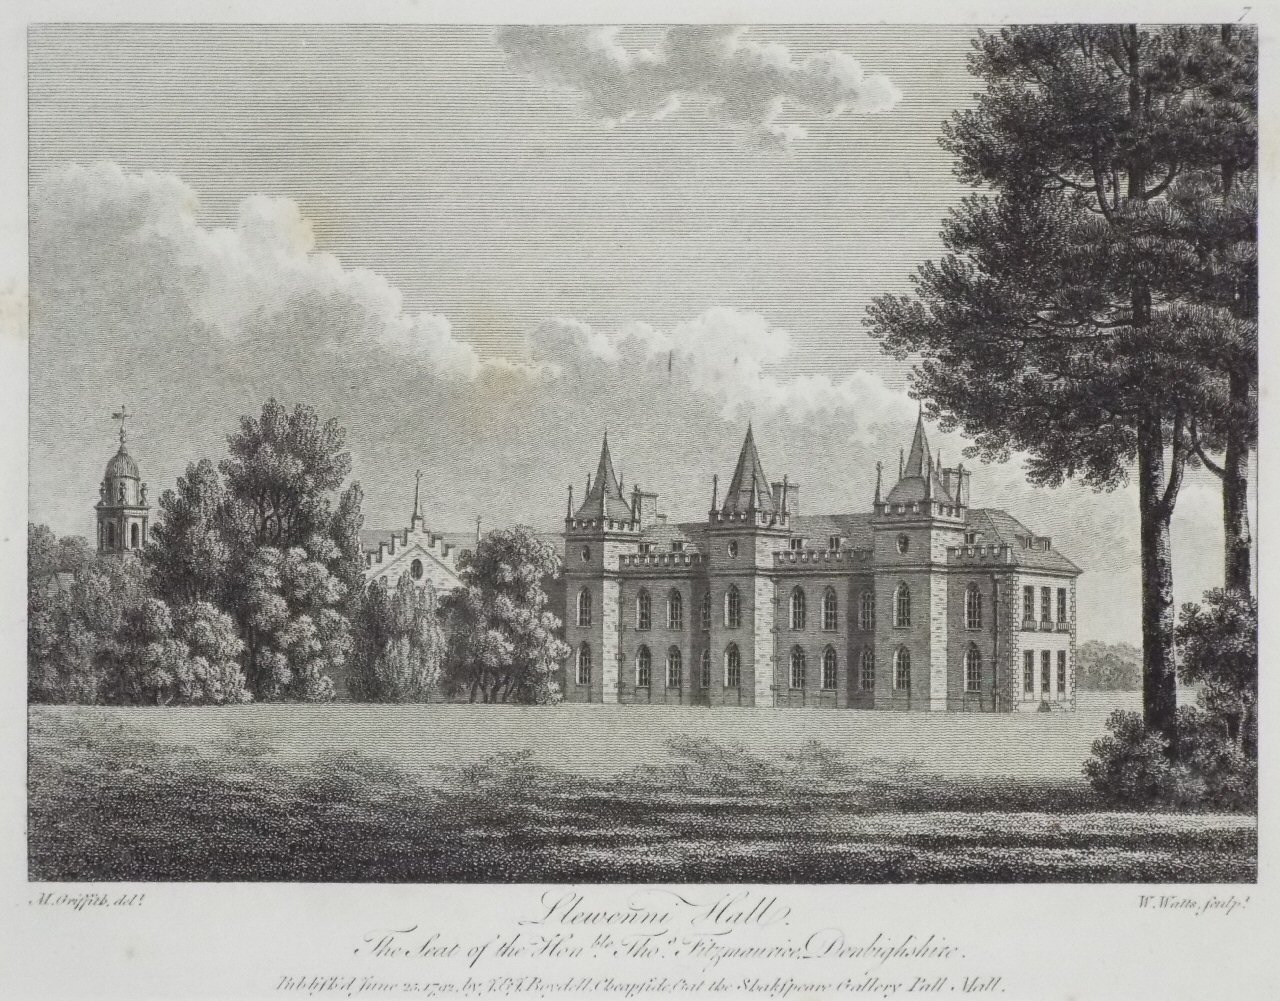 Print - Llewenni Hall. The Seat of the Honble. Thos. Fitzmaurice, Denbighshire. - Watts